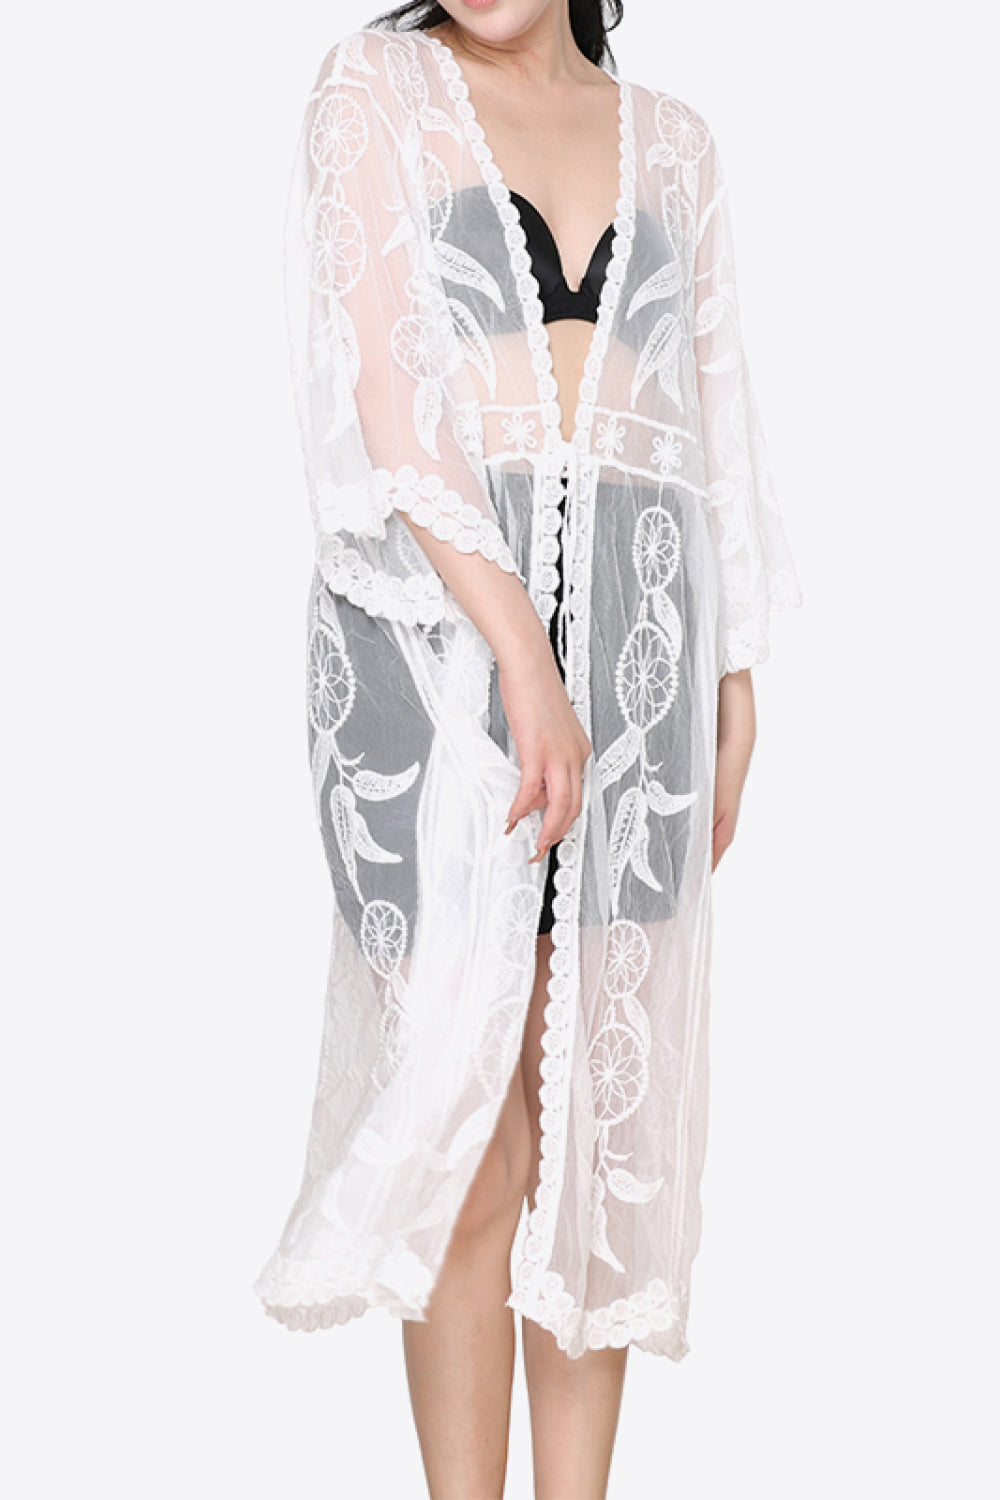 Tied Sheer Cover Up Cardigan - TRENDMELO